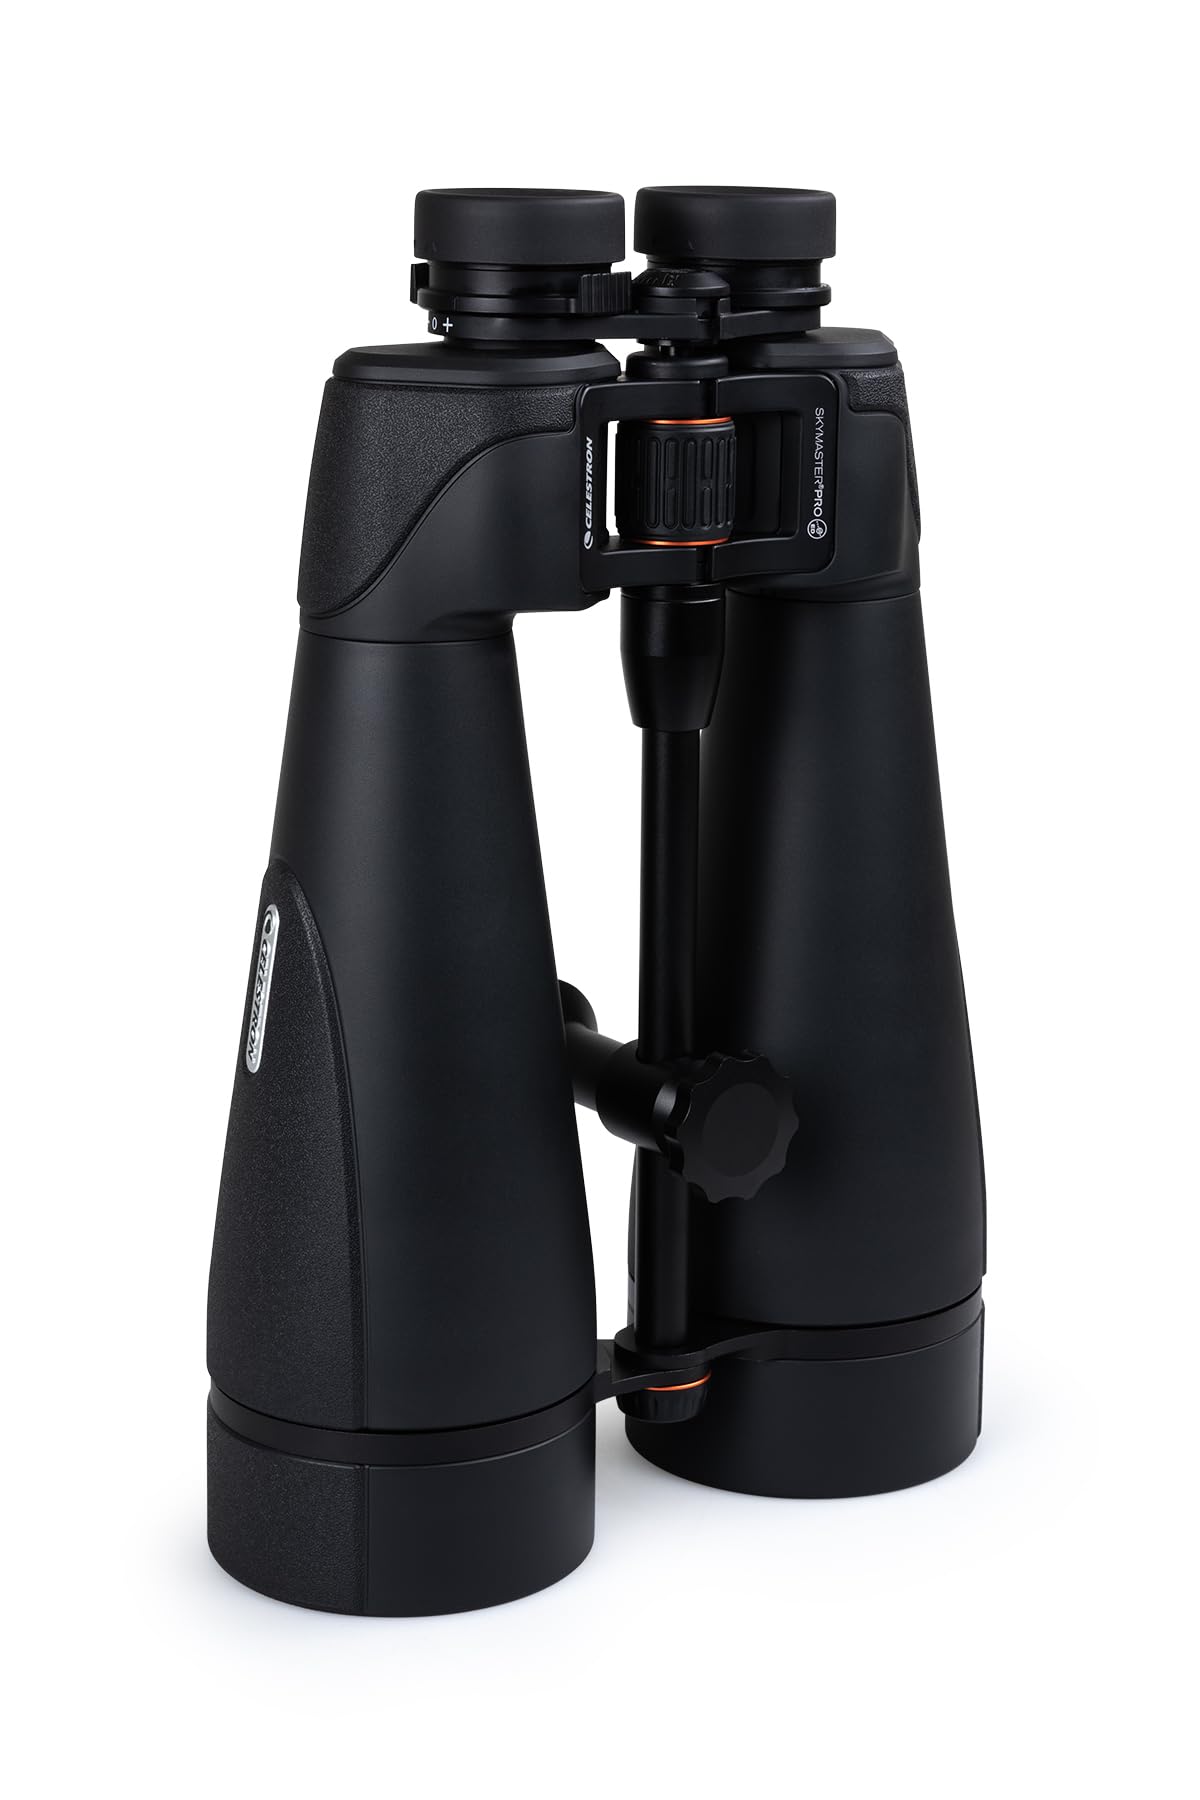 Celestron – SkyMaster Pro ED 20x80 Binocular – Astronomy Binocular with ED Glass – Large Aperture for Long Distance Viewing – Fully Multi-coated XLT Coating – Tripod Adapter and Carrying Case Included